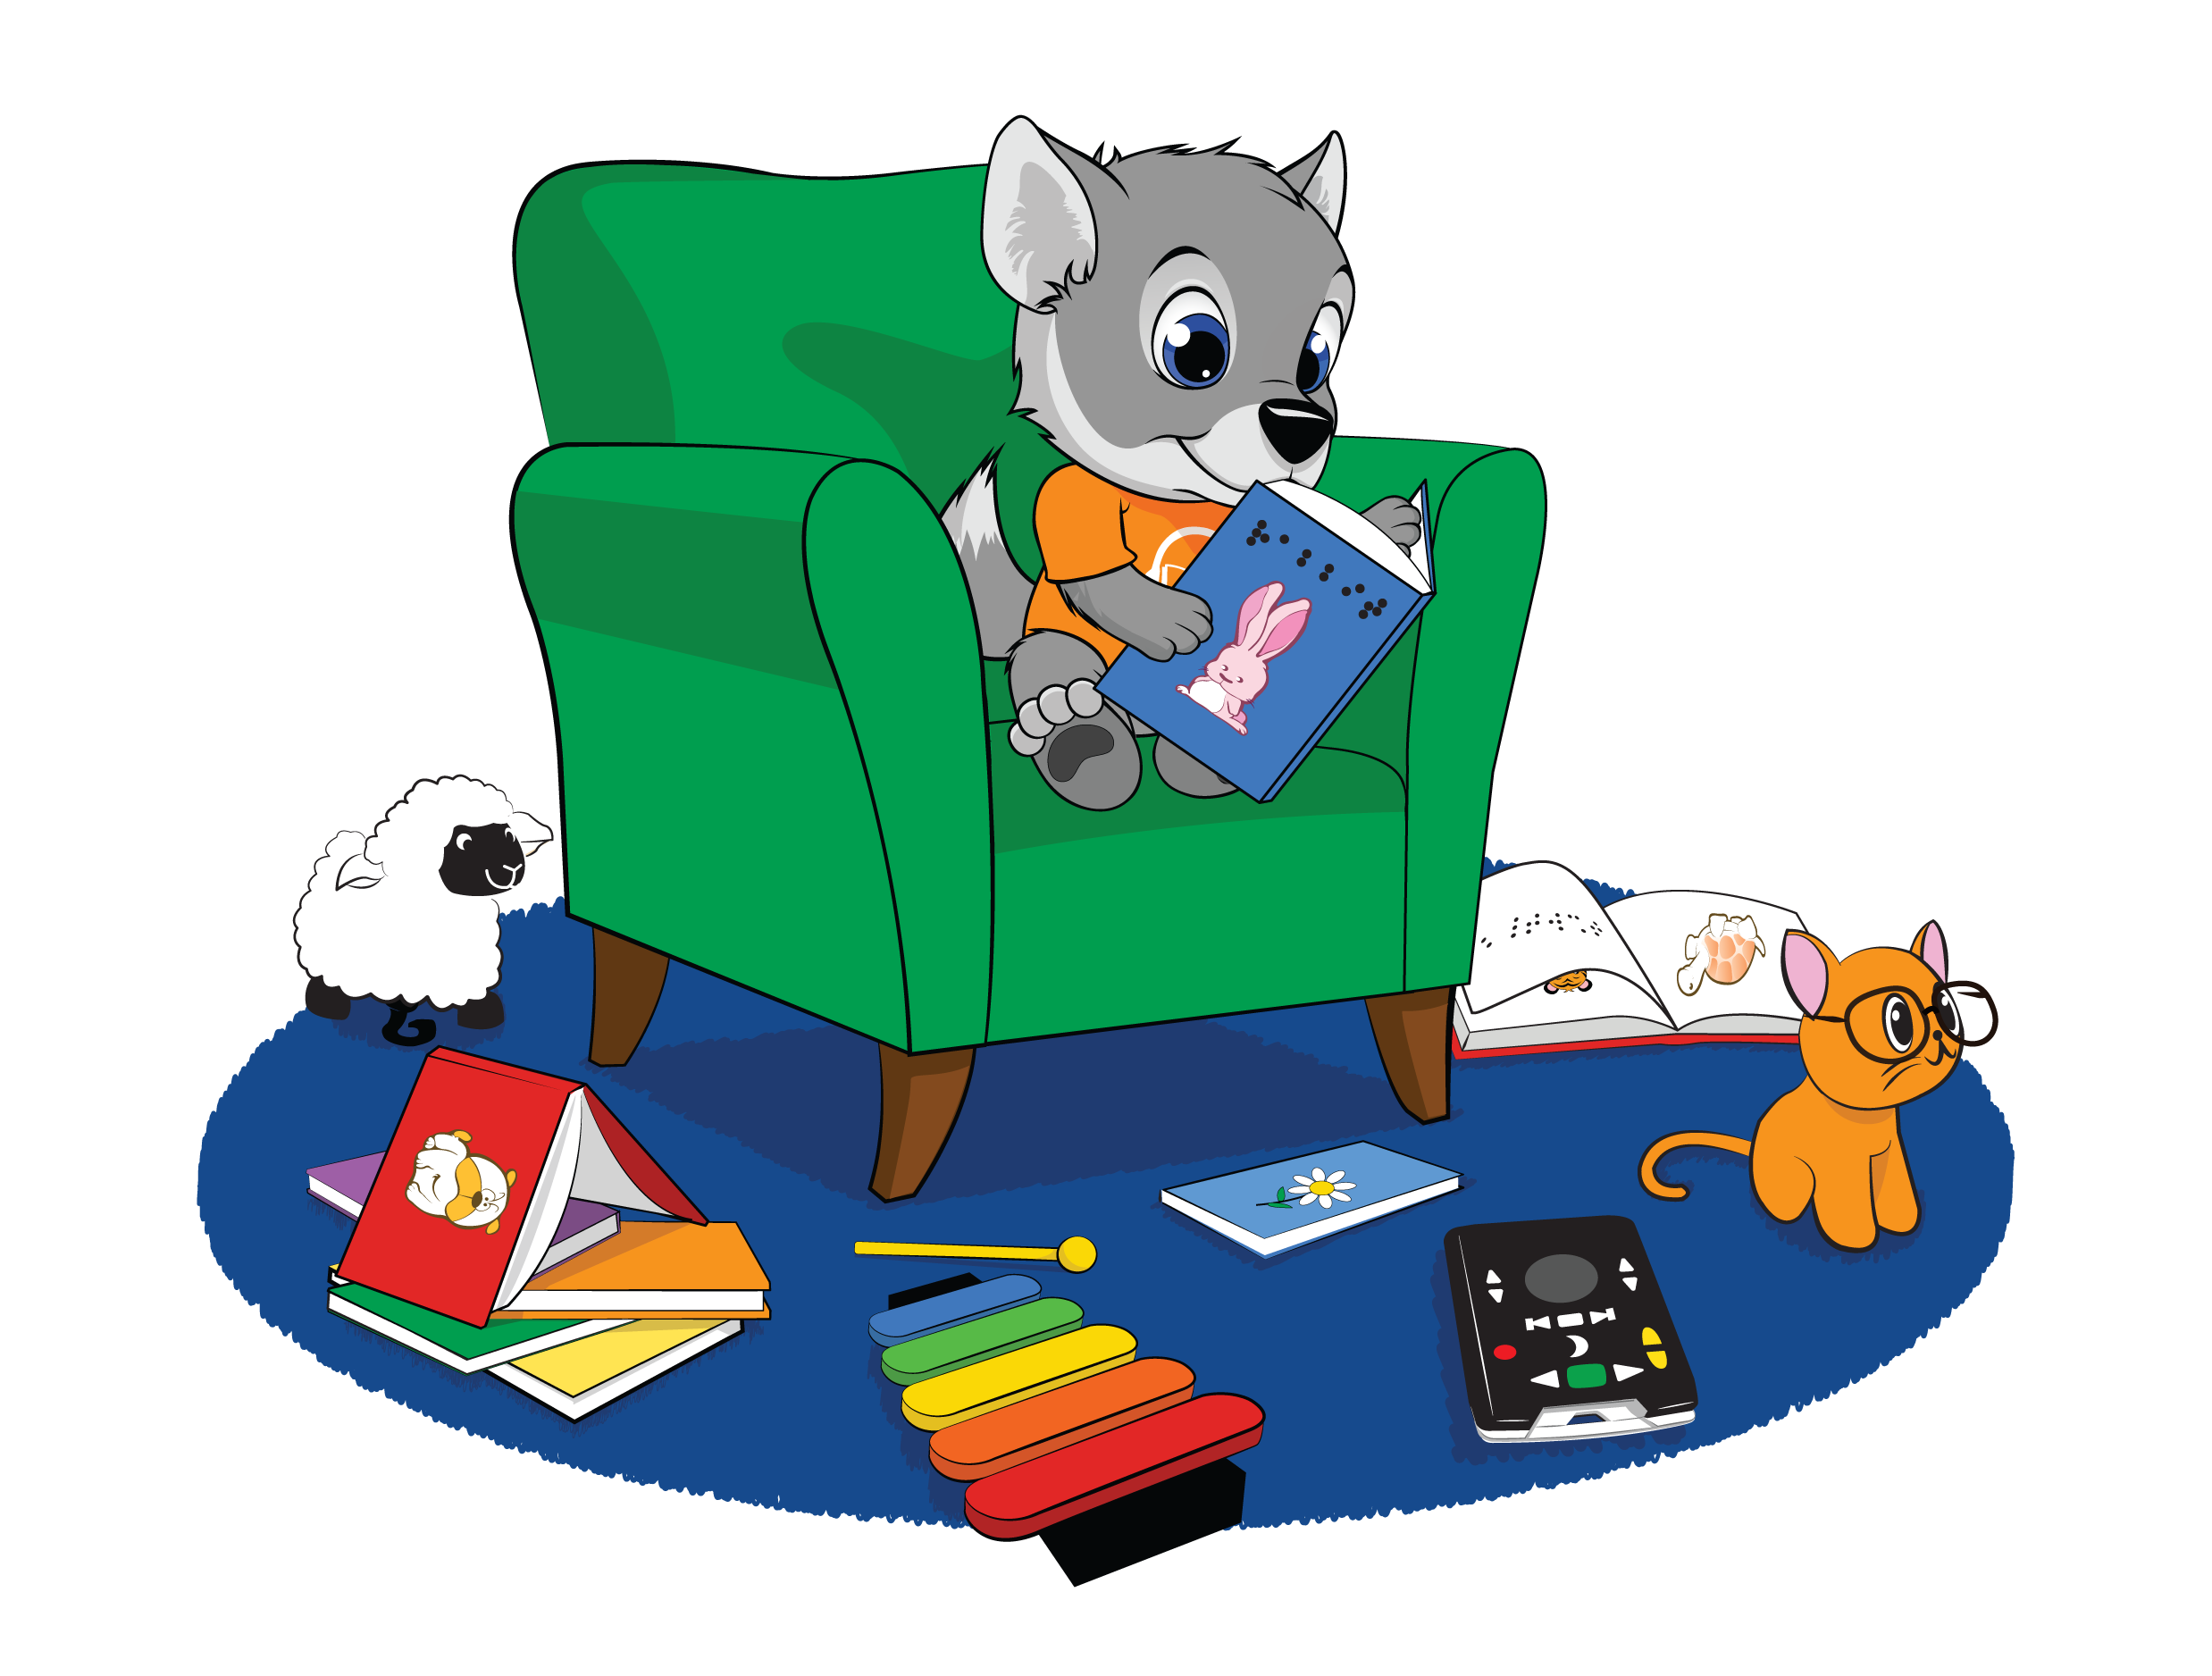 Wolfie sitting on a chair reading a book with books and toys all around him